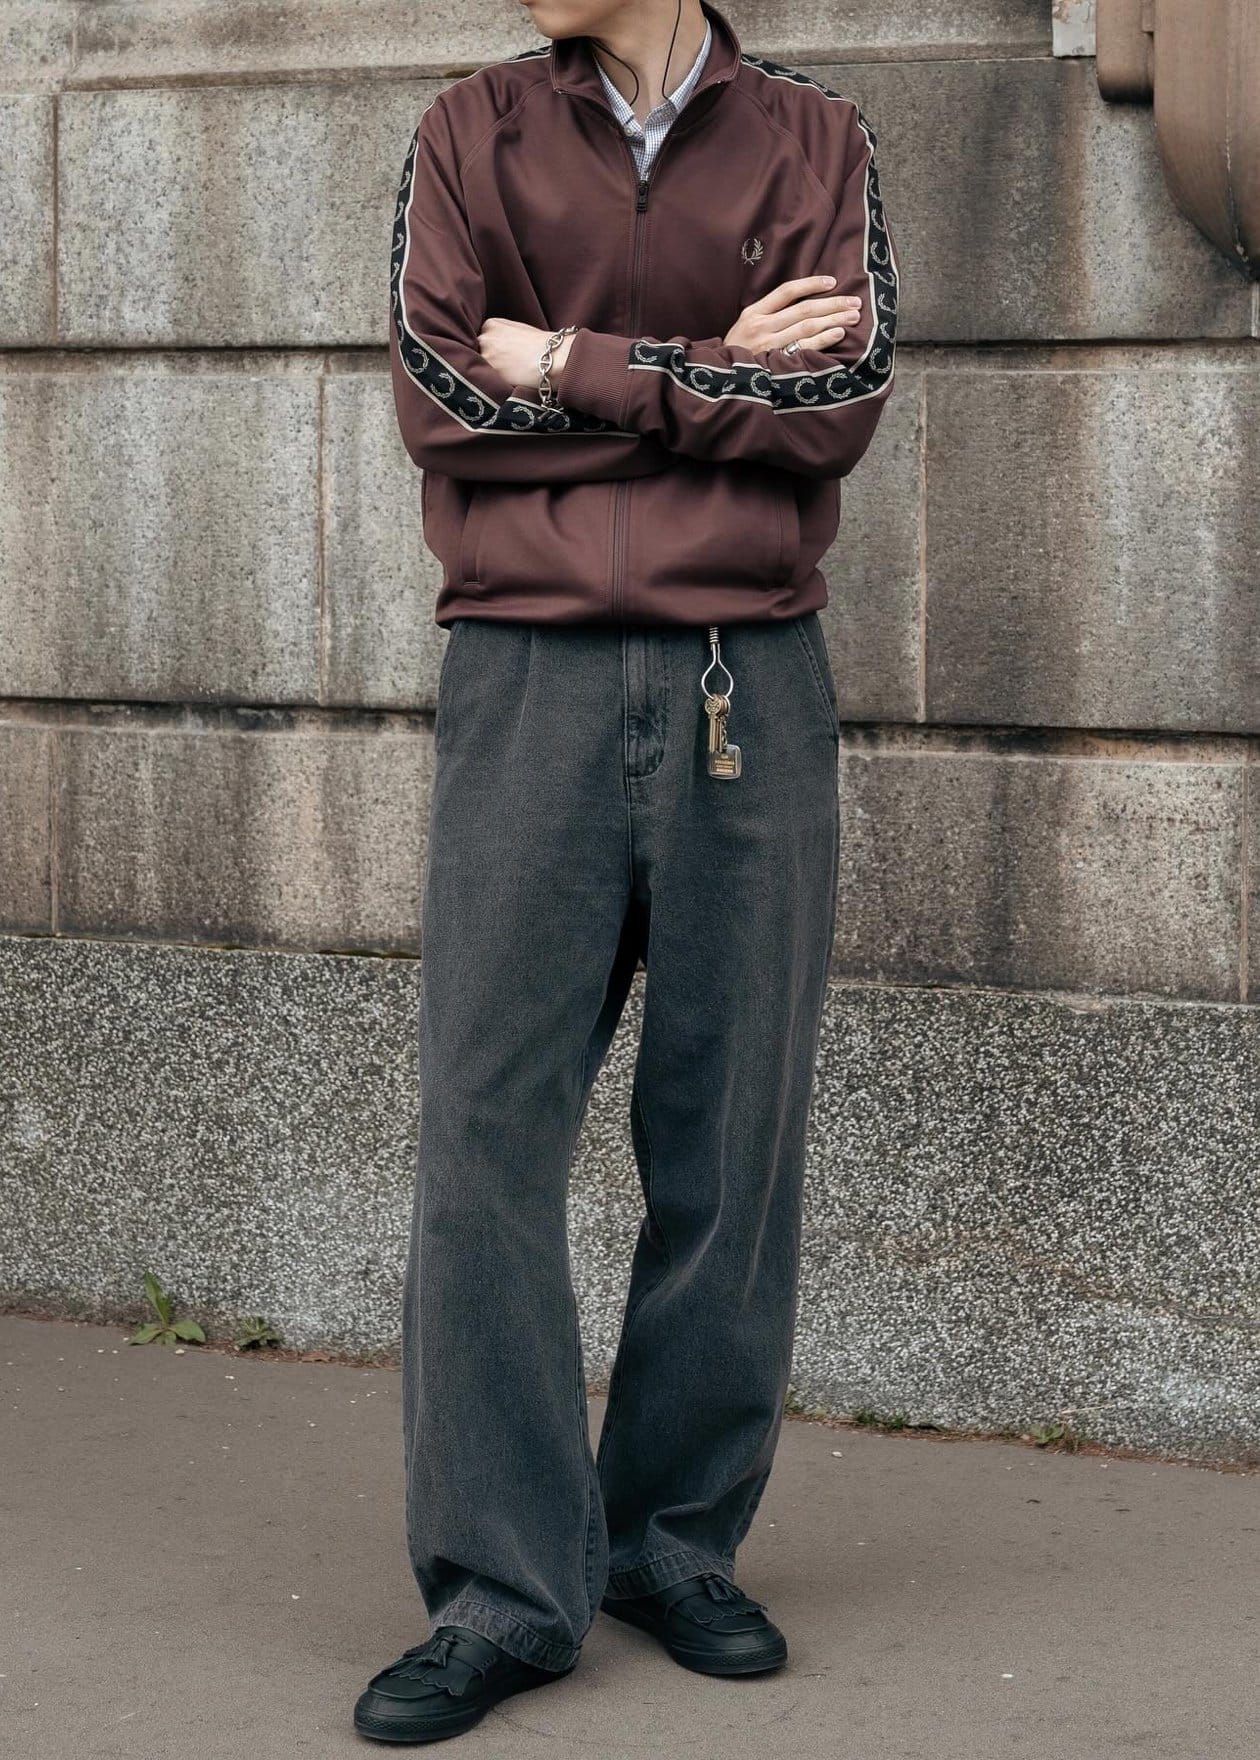 User Generated Content of man wearing a burgundy track jacket